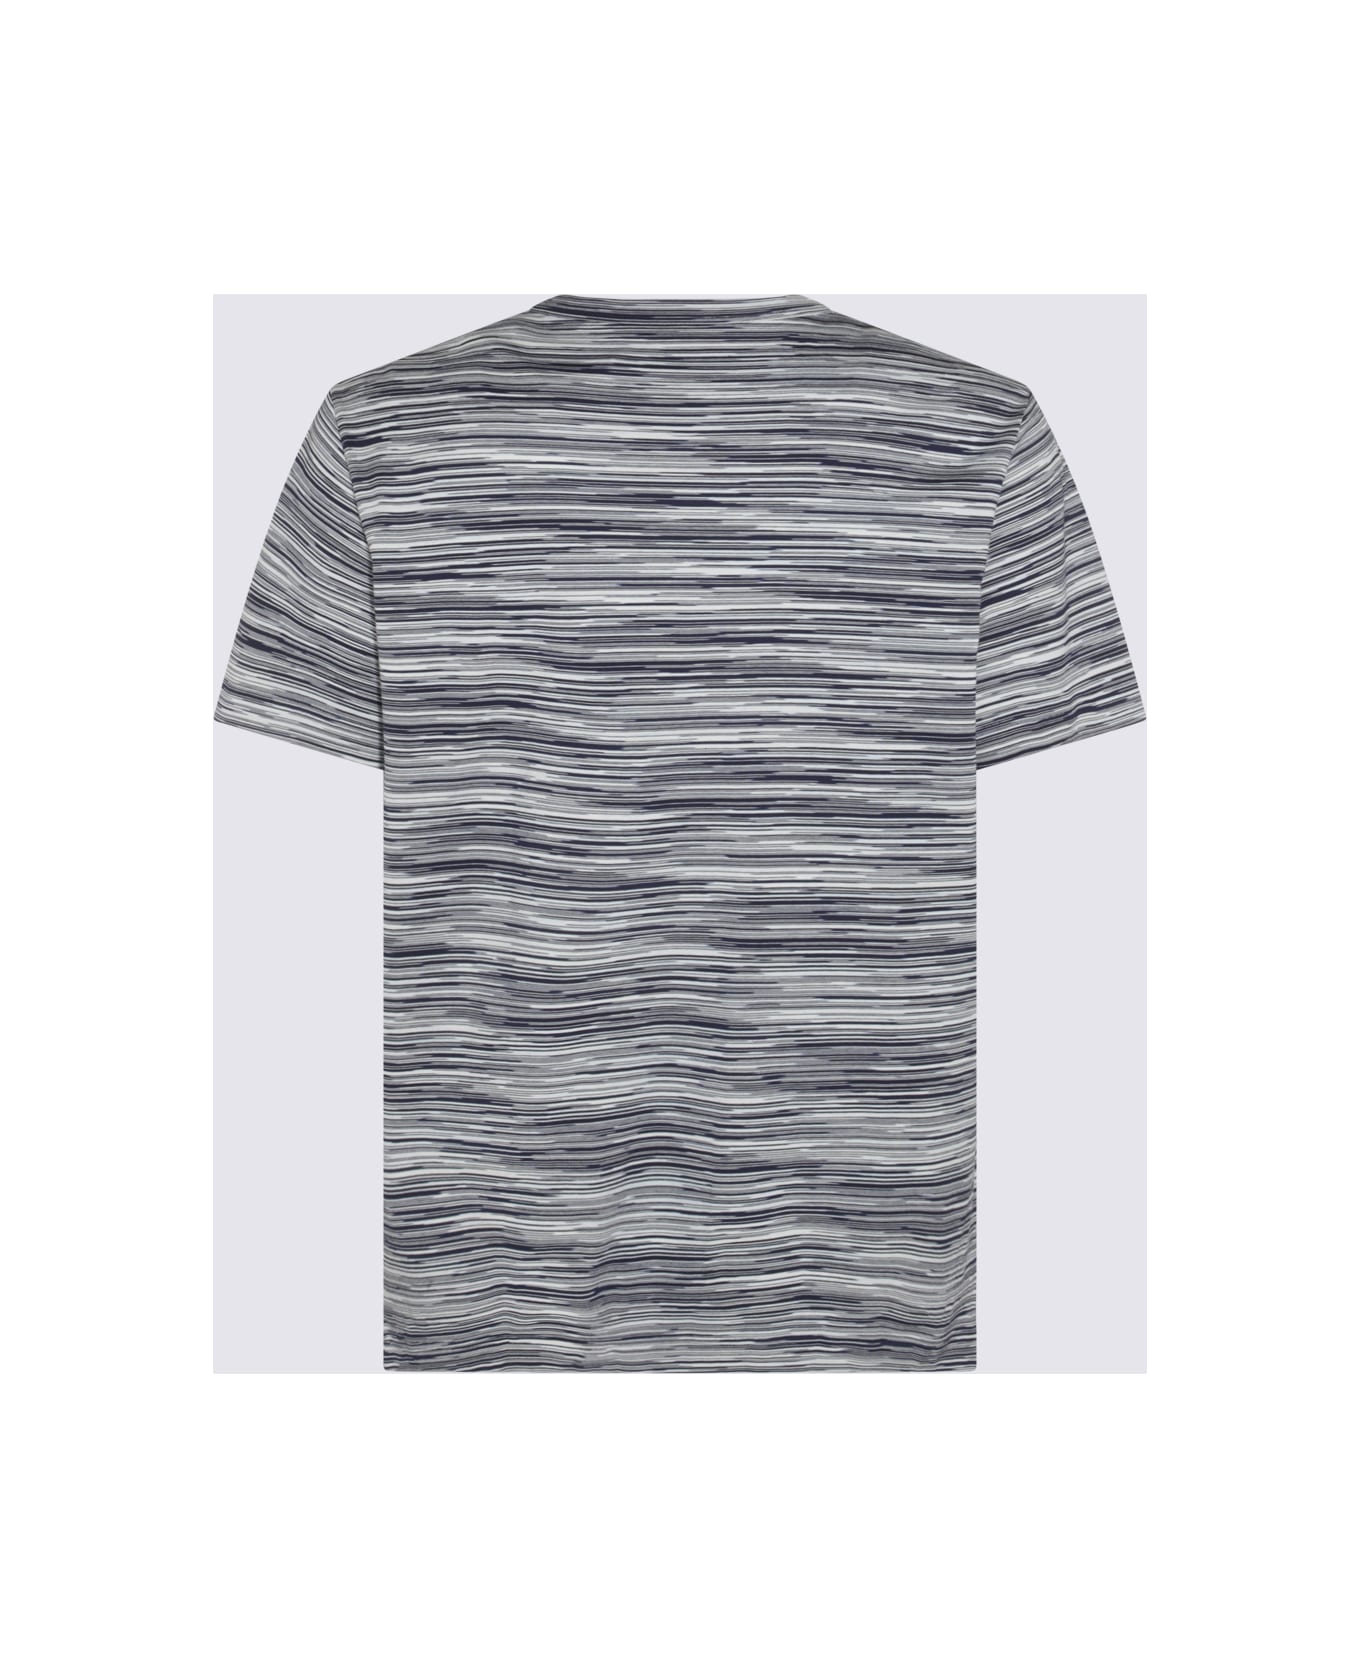 Missoni Multicolor Cotton T-shirt - SPACE DYED NAVY WHITE シャツ